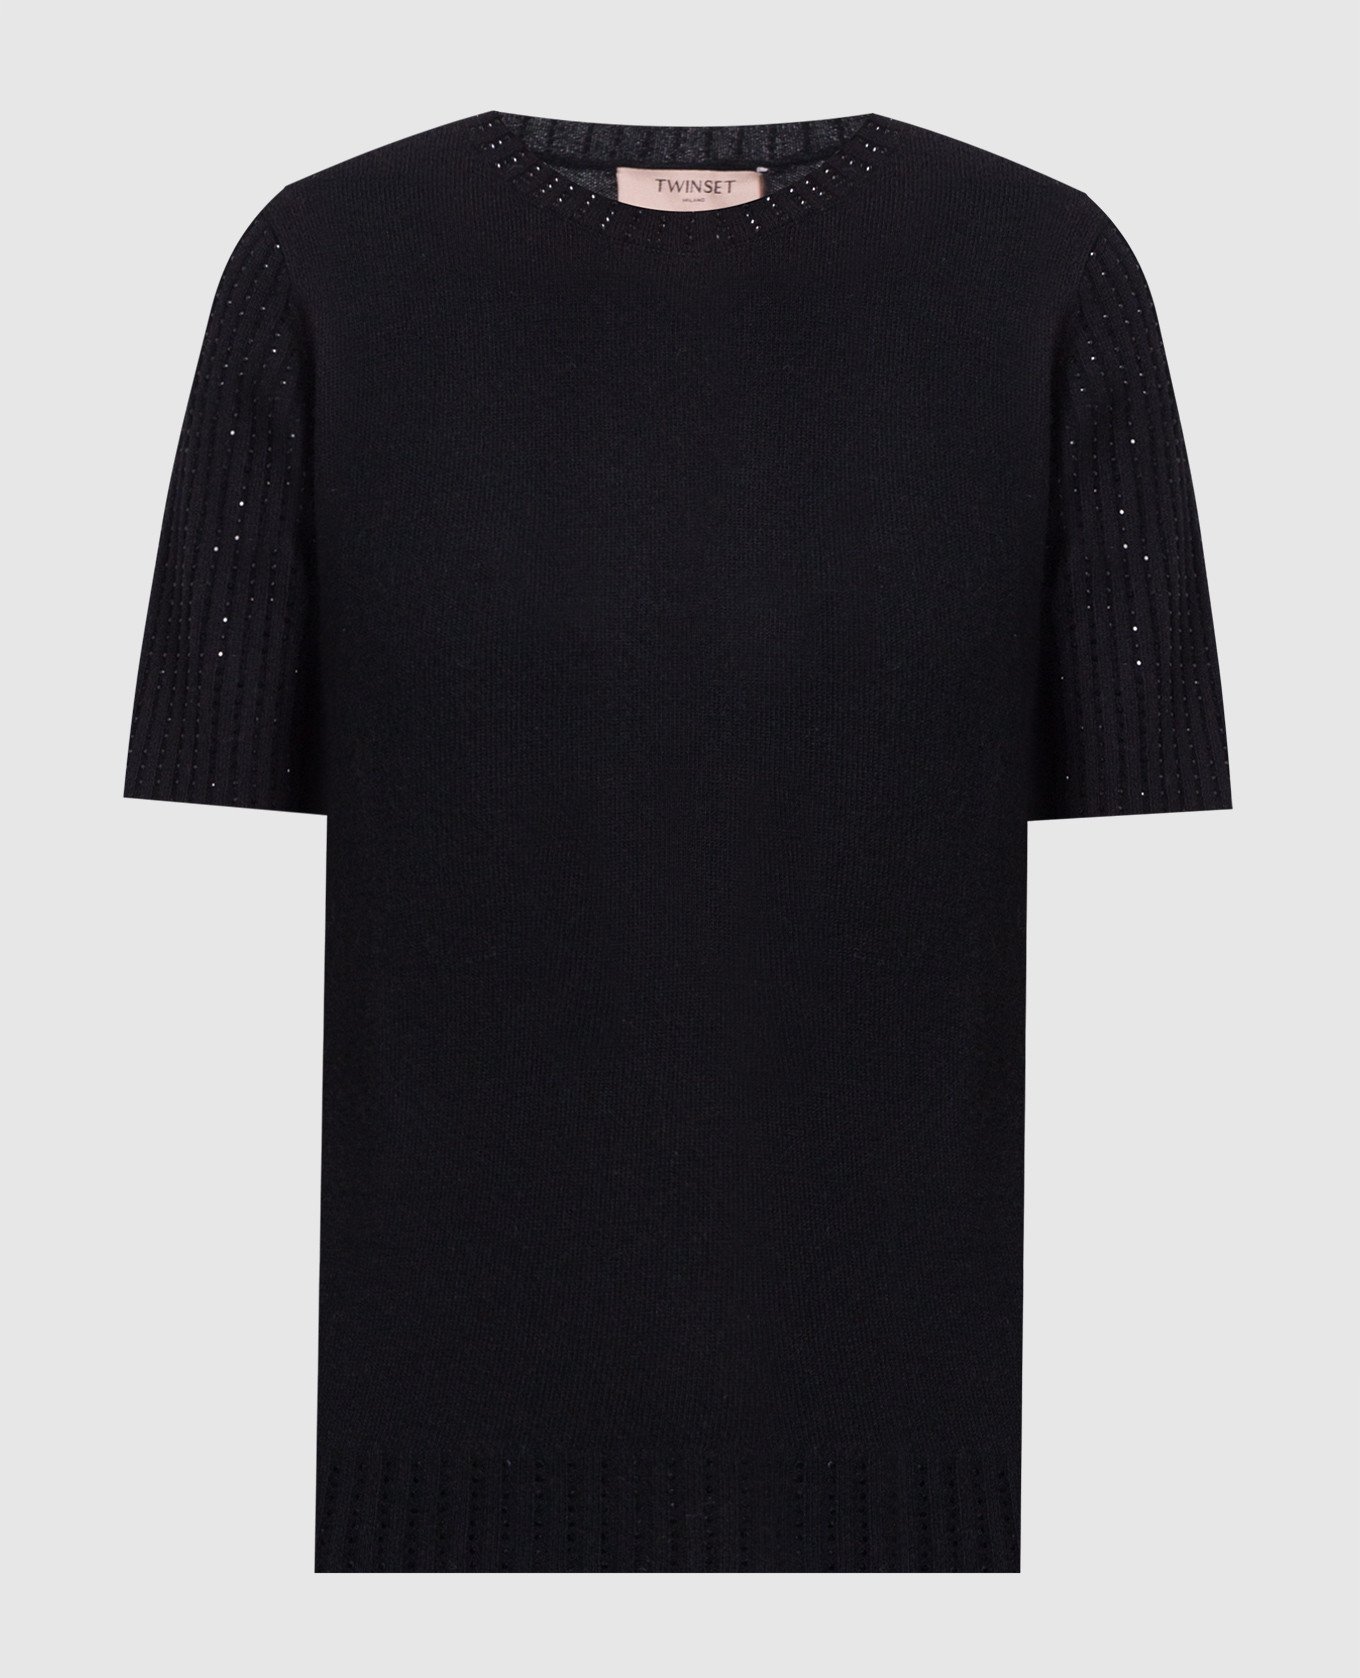 Black jumper with crystals